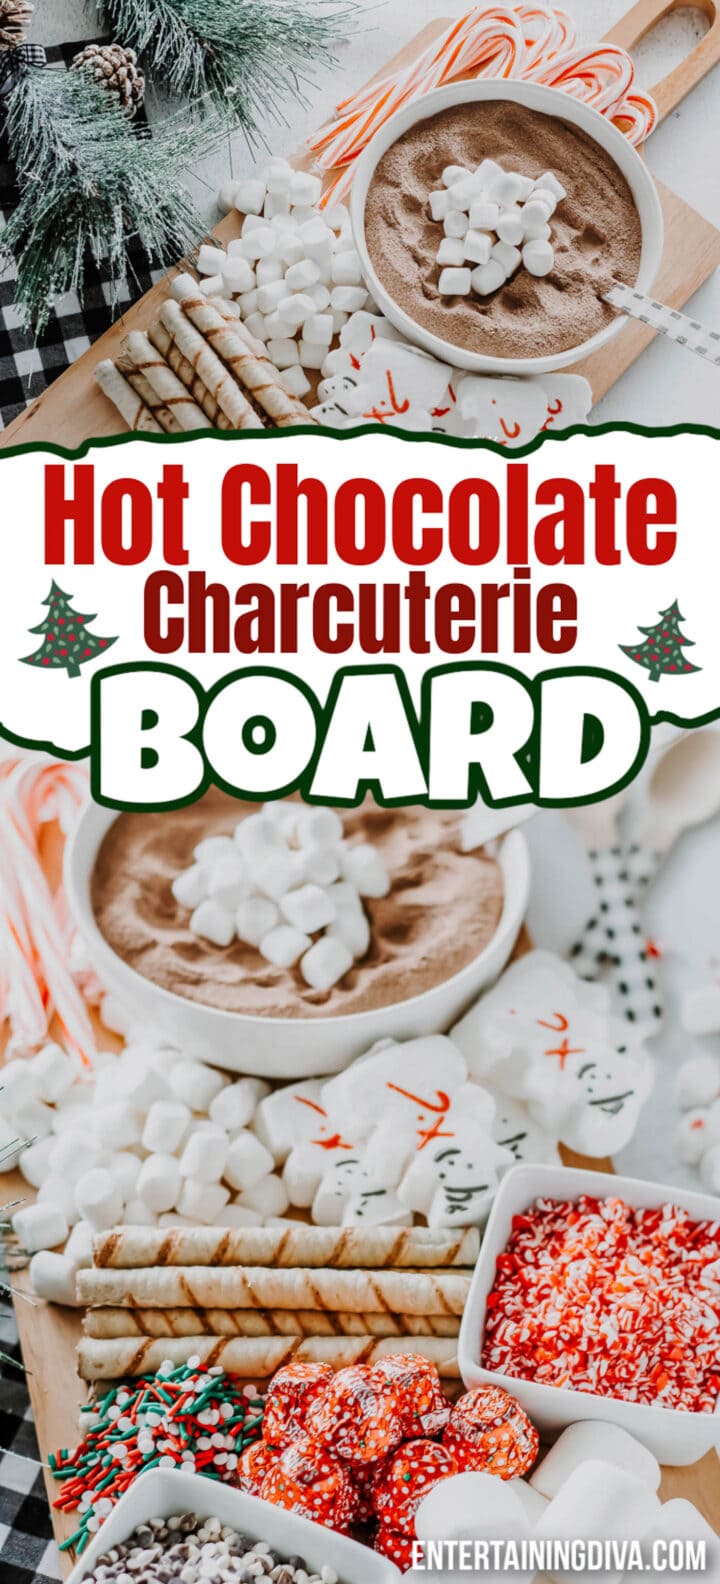 Hot chocolate charcuterie board, a delicious combination of indulgent hot cocoa and an assortment of savory meats and cheeses.